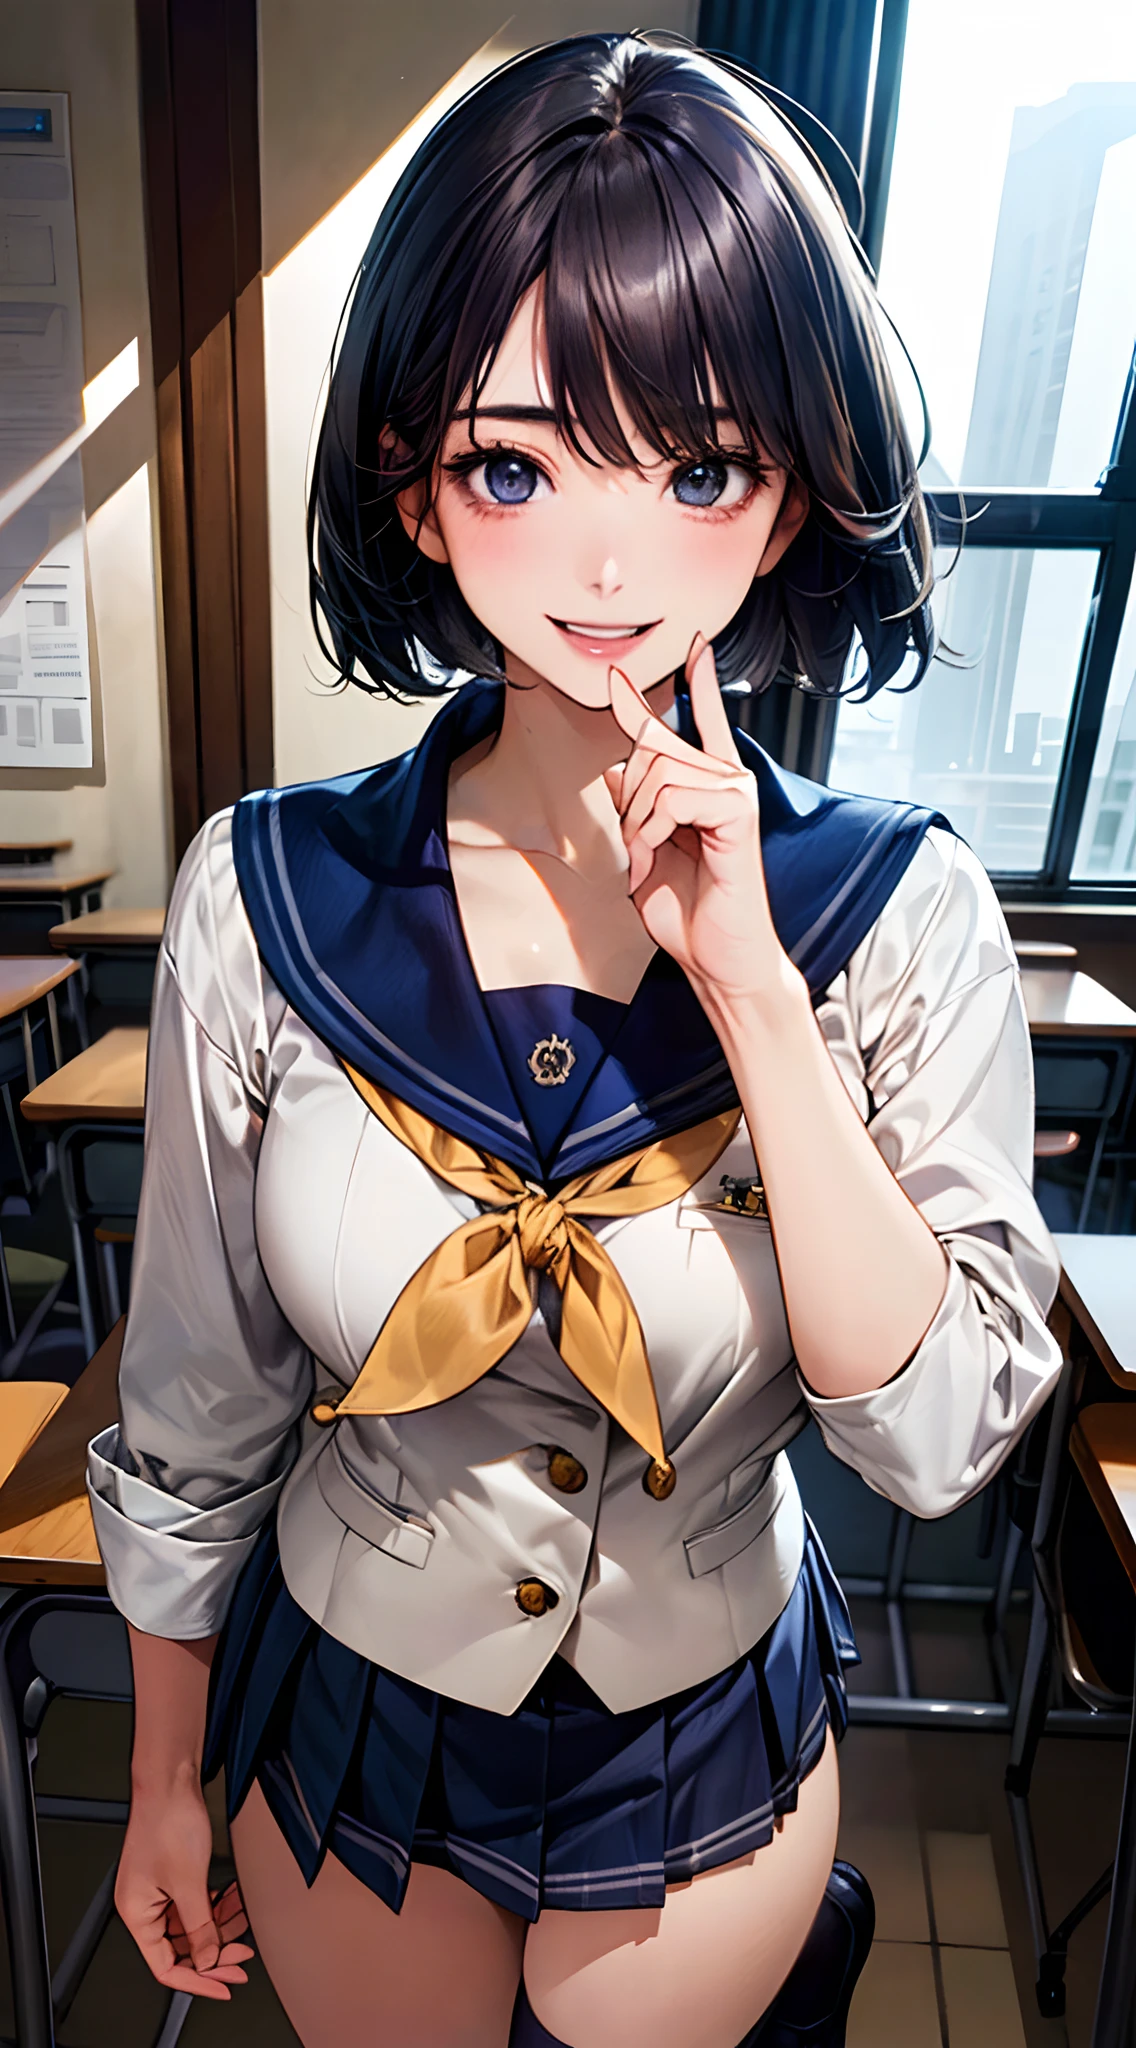 (masterpiece:1.2, top-quality), (realistic, photorealistic:1.4), beautiful illustration, NSFW, 
looking at viewer, cowboy shot, front view:0.8, 
1 girl, japanese, high school girl, black hair, (short hair:1.4), (bob hair:1.2), bangs, hair between eye, blue eyes, large breasts:1.0, (thick thighs), 
beautiful hair, beautiful face, beautiful detailed eyes, beautiful clavicle, beautiful body, beautiful chest, beautiful thigh, beautiful legs, beautiful fingers, 
(beautiful scenery), dawn, bright and refreshing classroom, desks, chairs, curtains, 
((navy blazer, pleated miniskirt, navy blue socks, private school uniform:1.2)), white panties, 
(swollen), ((seductive posture: 1.2, attractiveness: 1.2)), (idle),
(erotic,sexy, upper eyes, smiling smile: 1.2), shiny skin, open mouth, (put her finger on one's lips), 
perfect face, cute and symmetrical face, natural side lighting, movie lighting),